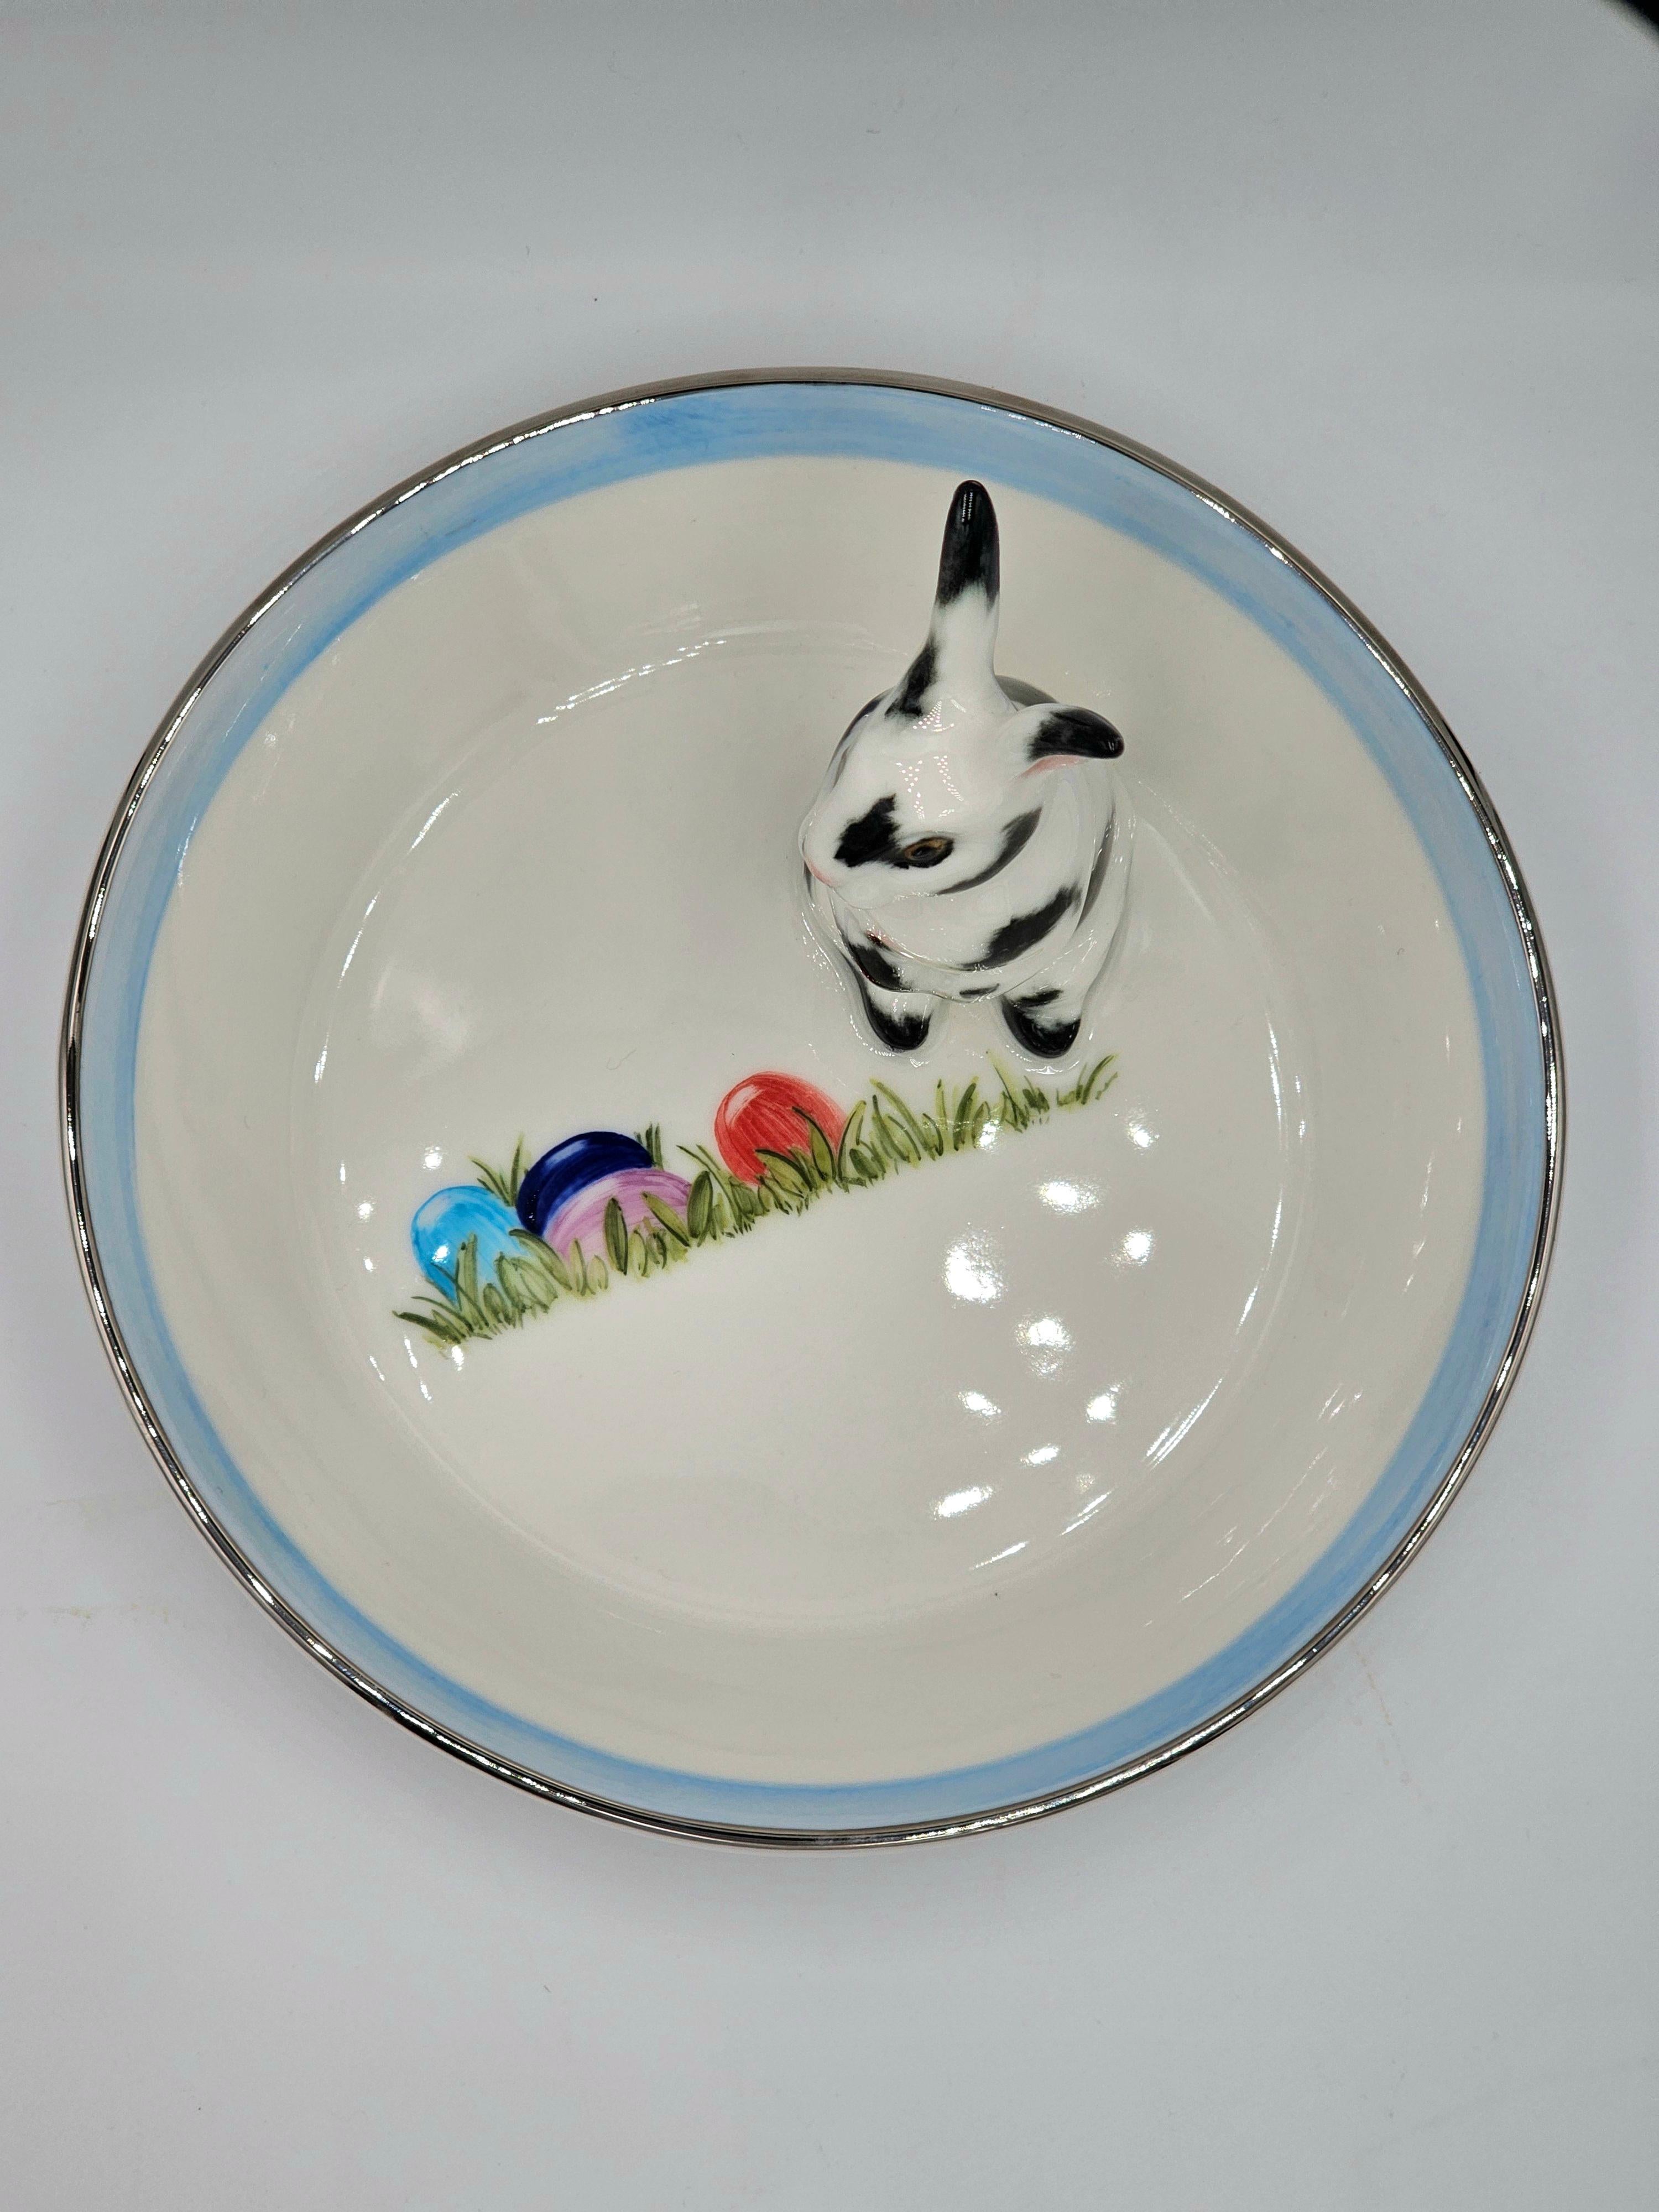 Completely handmade porcelain bowl with a hands-free naturalistic painted Easter hare figure with black spots. The bunny is sitting on the side of the bowl for decorating nuts or sweets around.
The dish inside is handsfree painted with colorful